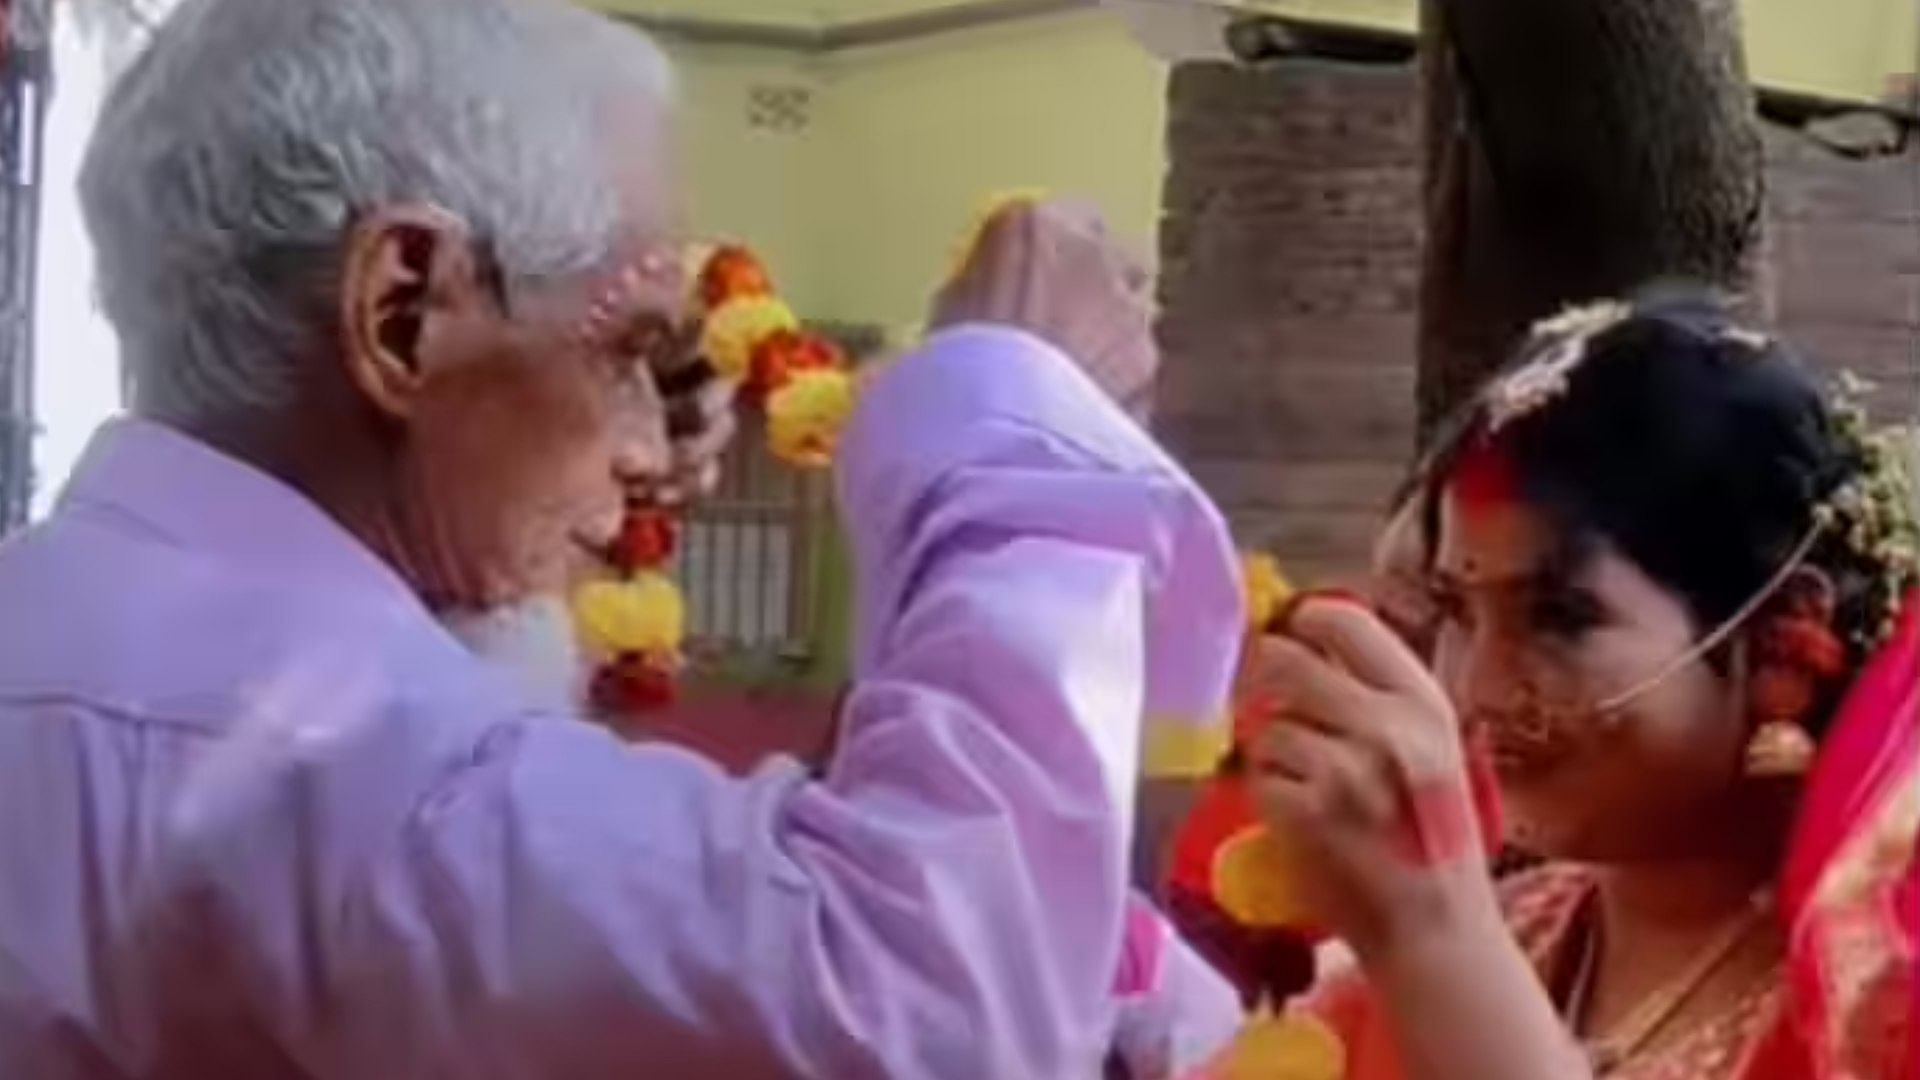 Dulha Dulhan Ka Video: 70 years old man marry with 20 year old bride video goes viral